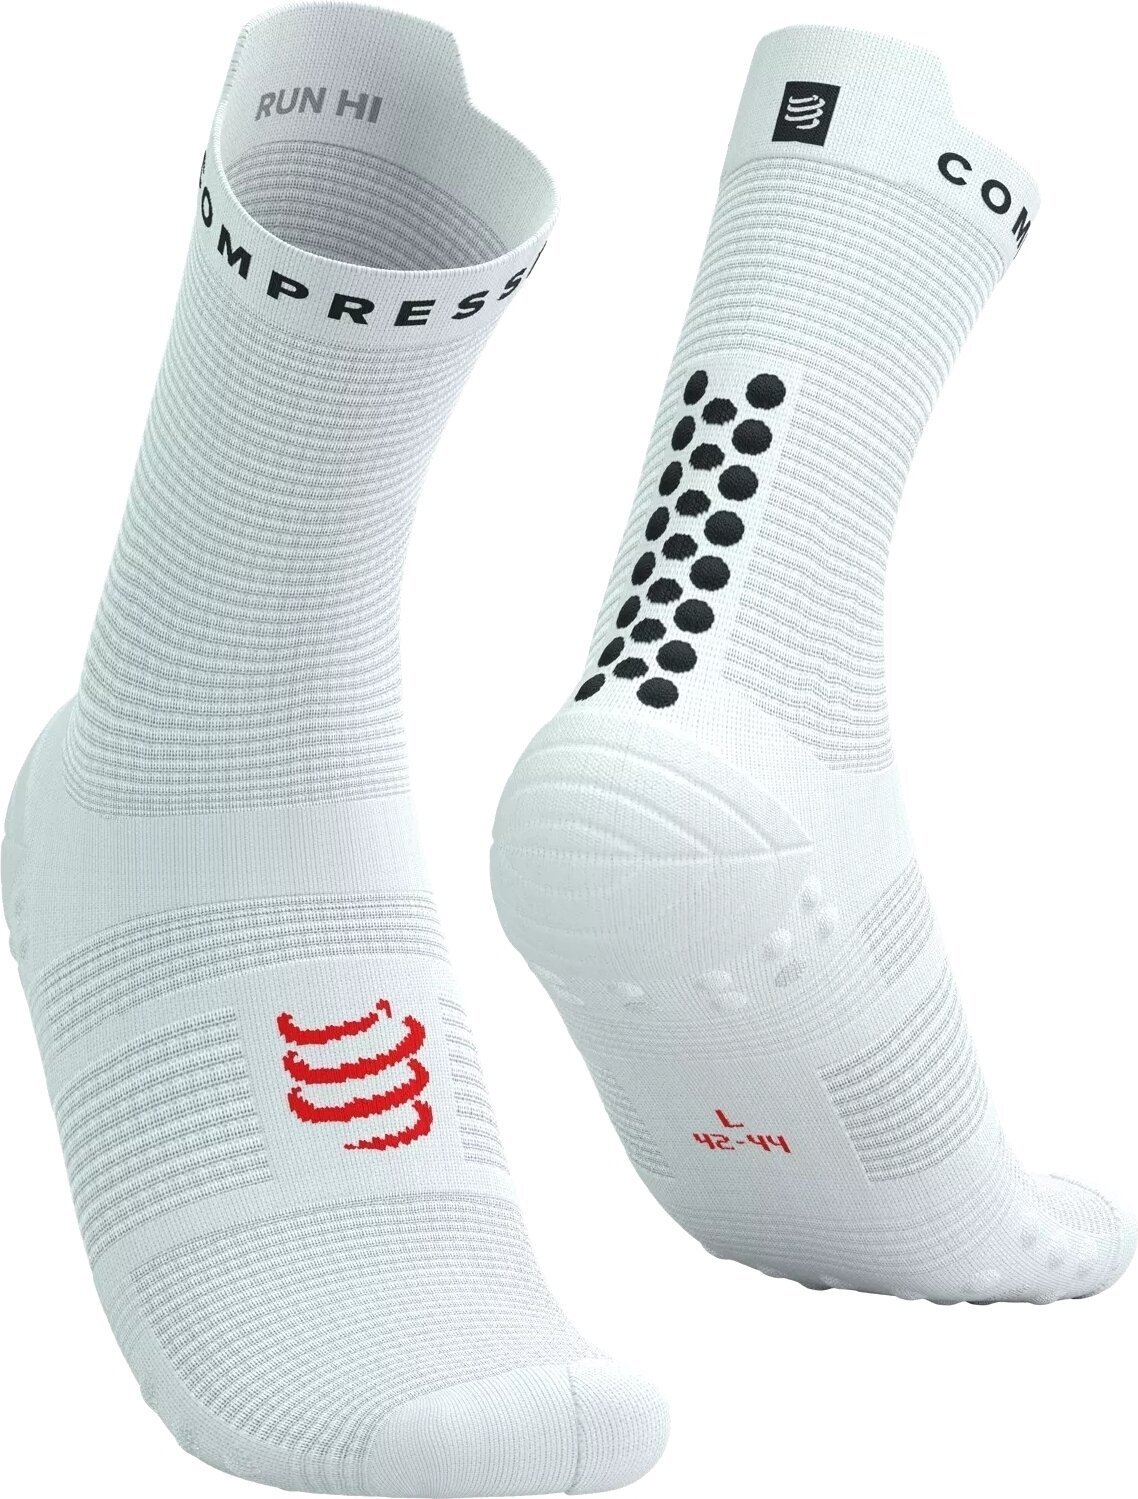 Calcetines para correr Compressport Pro Racing Socks V4.0 Run High White/Black/Core Red T1 Calcetines para correr